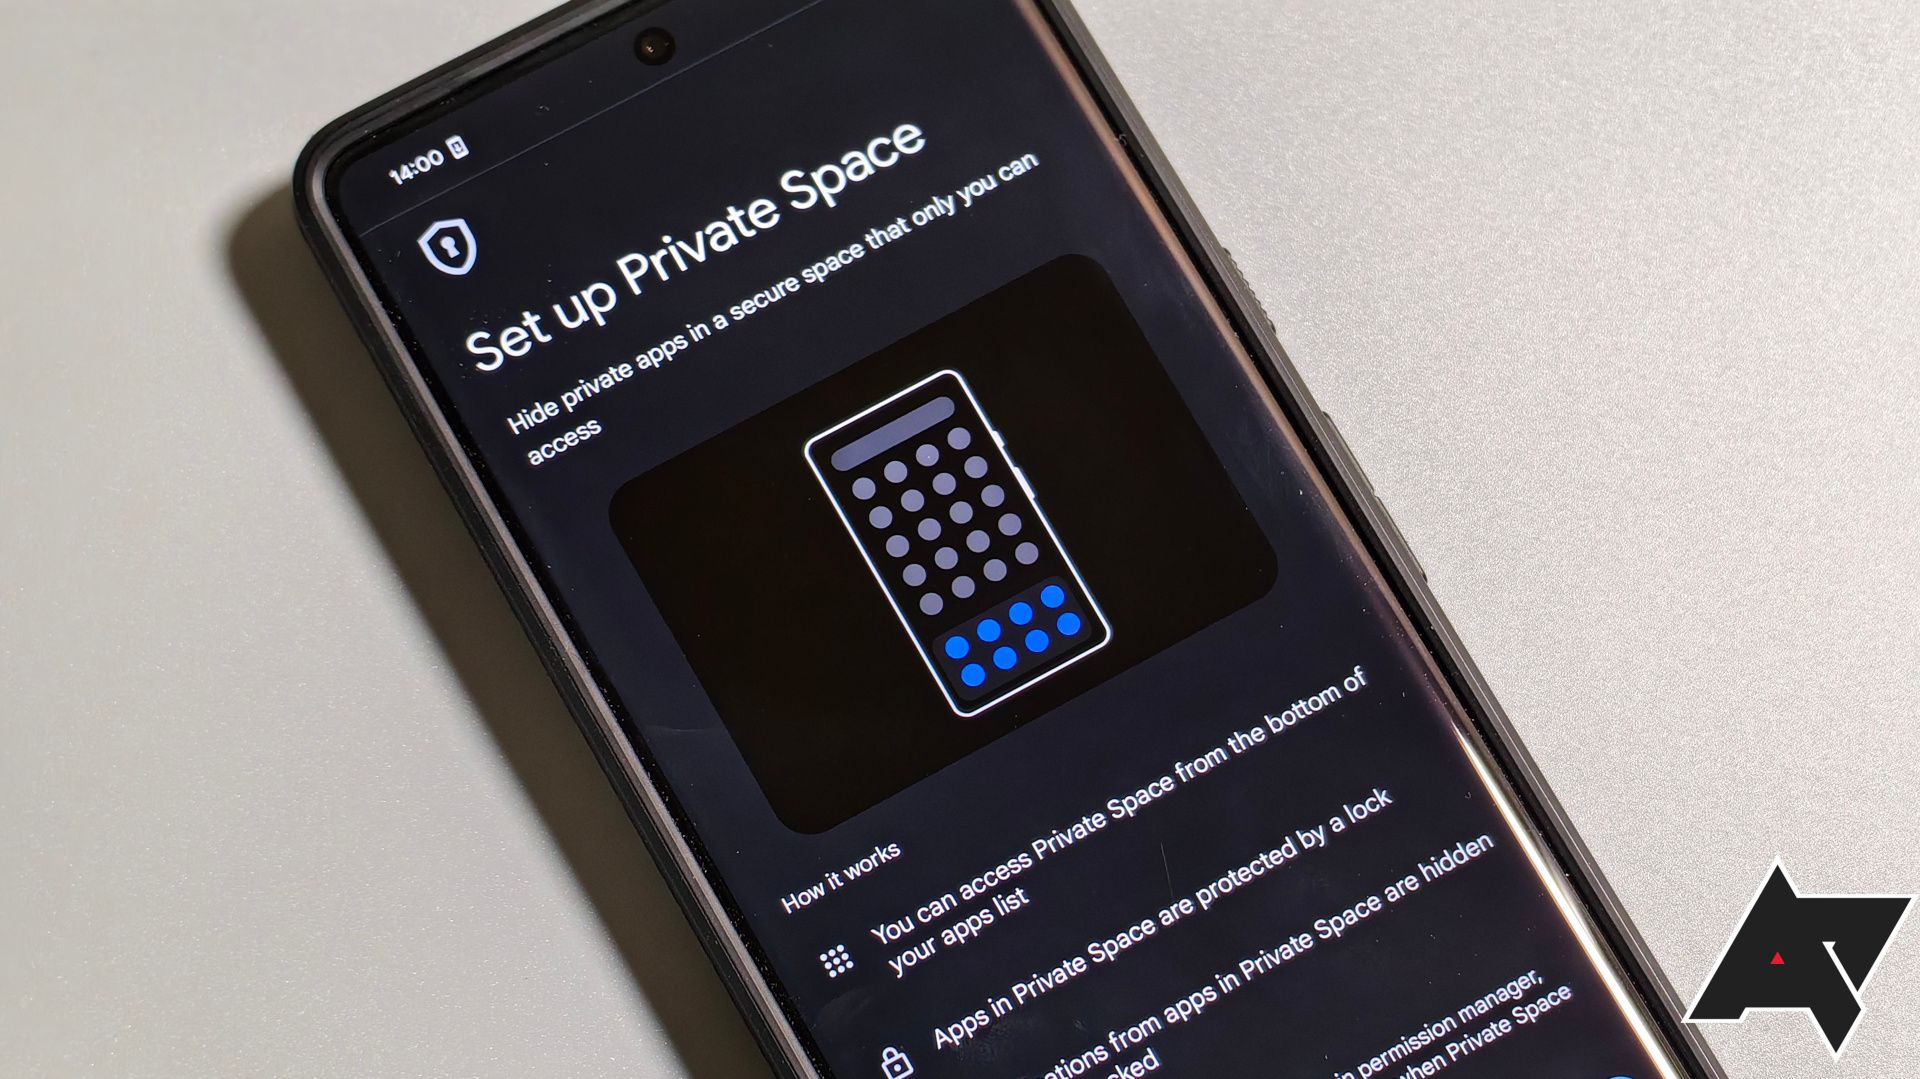 Here's your first look at Private Space, Android's answer to